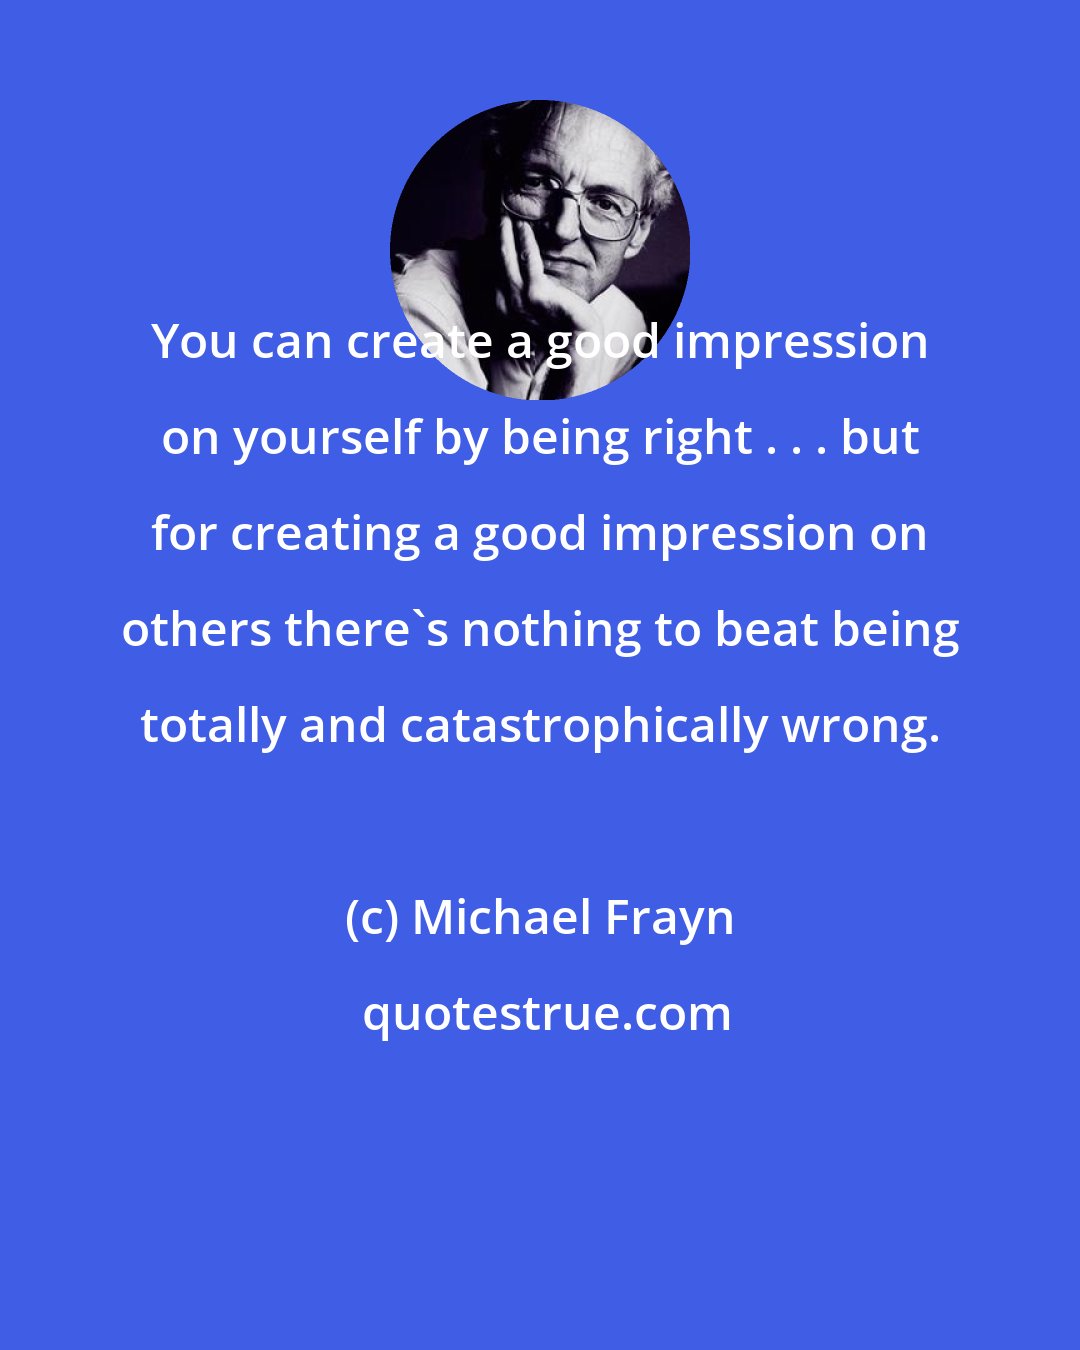 Michael Frayn: You can create a good impression on yourself by being right . . . but for creating a good impression on others there's nothing to beat being totally and catastrophically wrong.